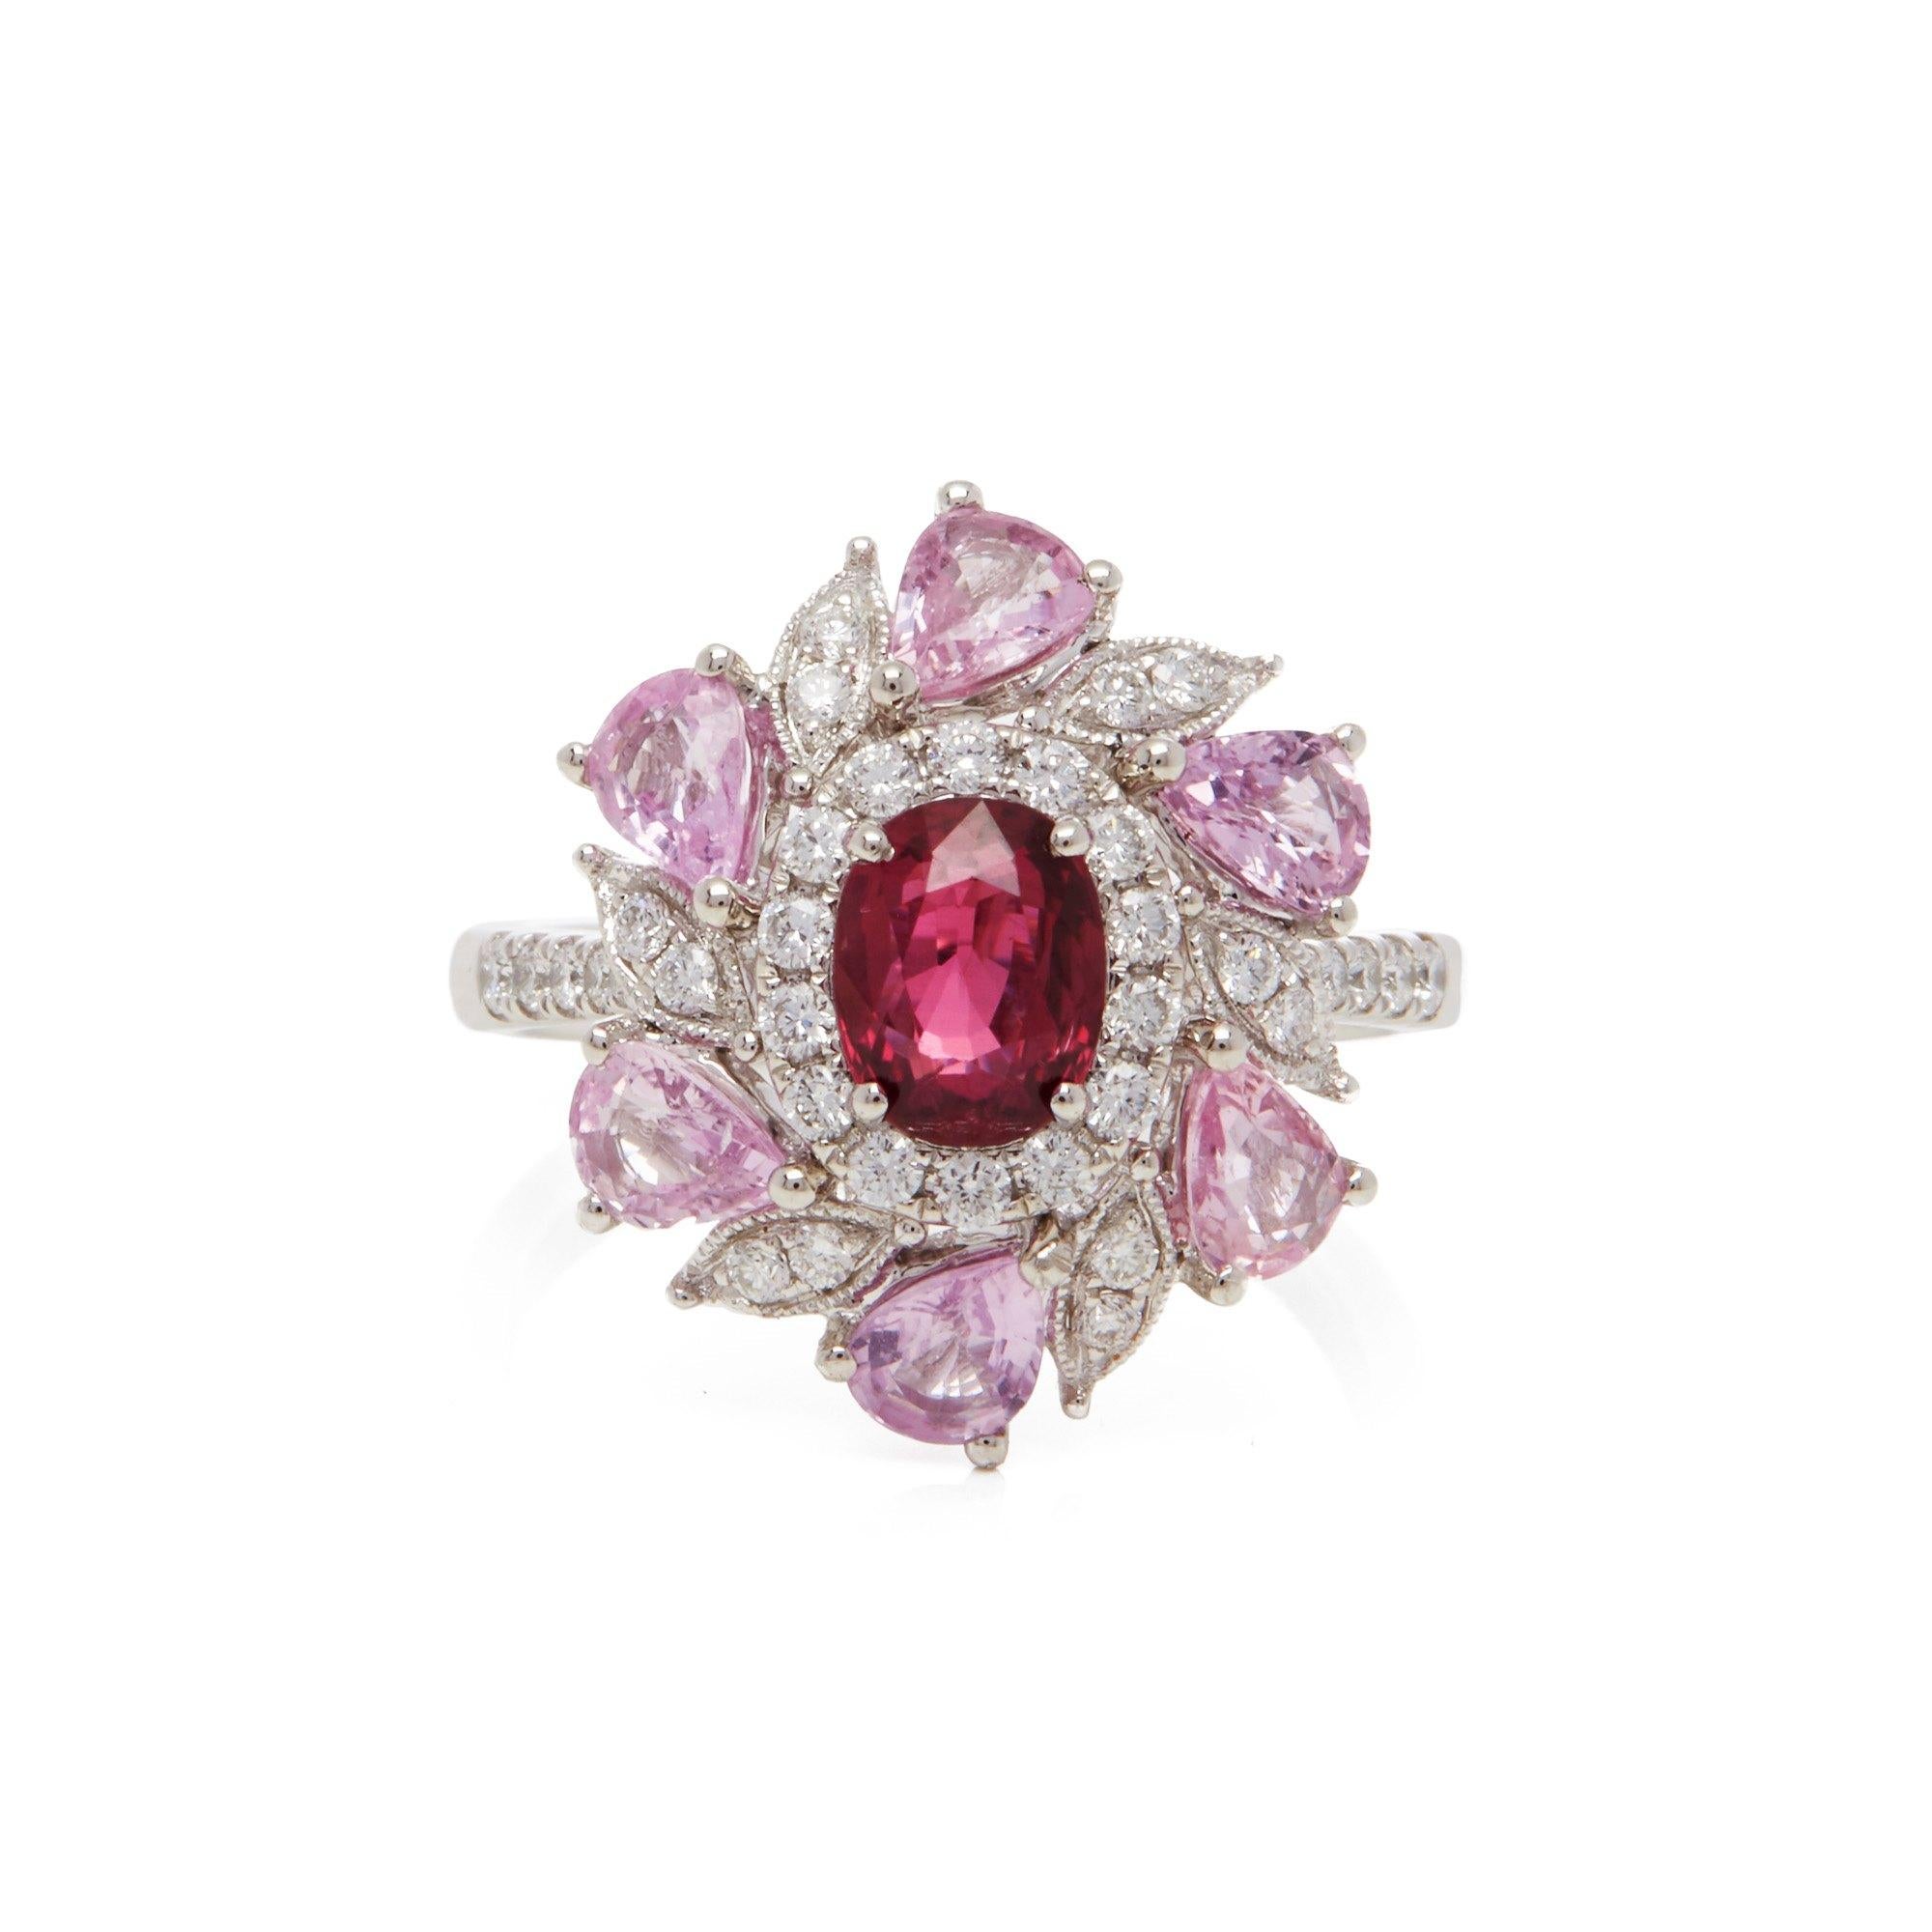 This ring designed by David Jerome is from his private collection and features one oval cut Ruby sourced in Mozambique. Set with a mix of round brilliant cut Diamonds and pear cut pink Sapphires totalling 2.28cts combined. Mounted in platinum. Ring